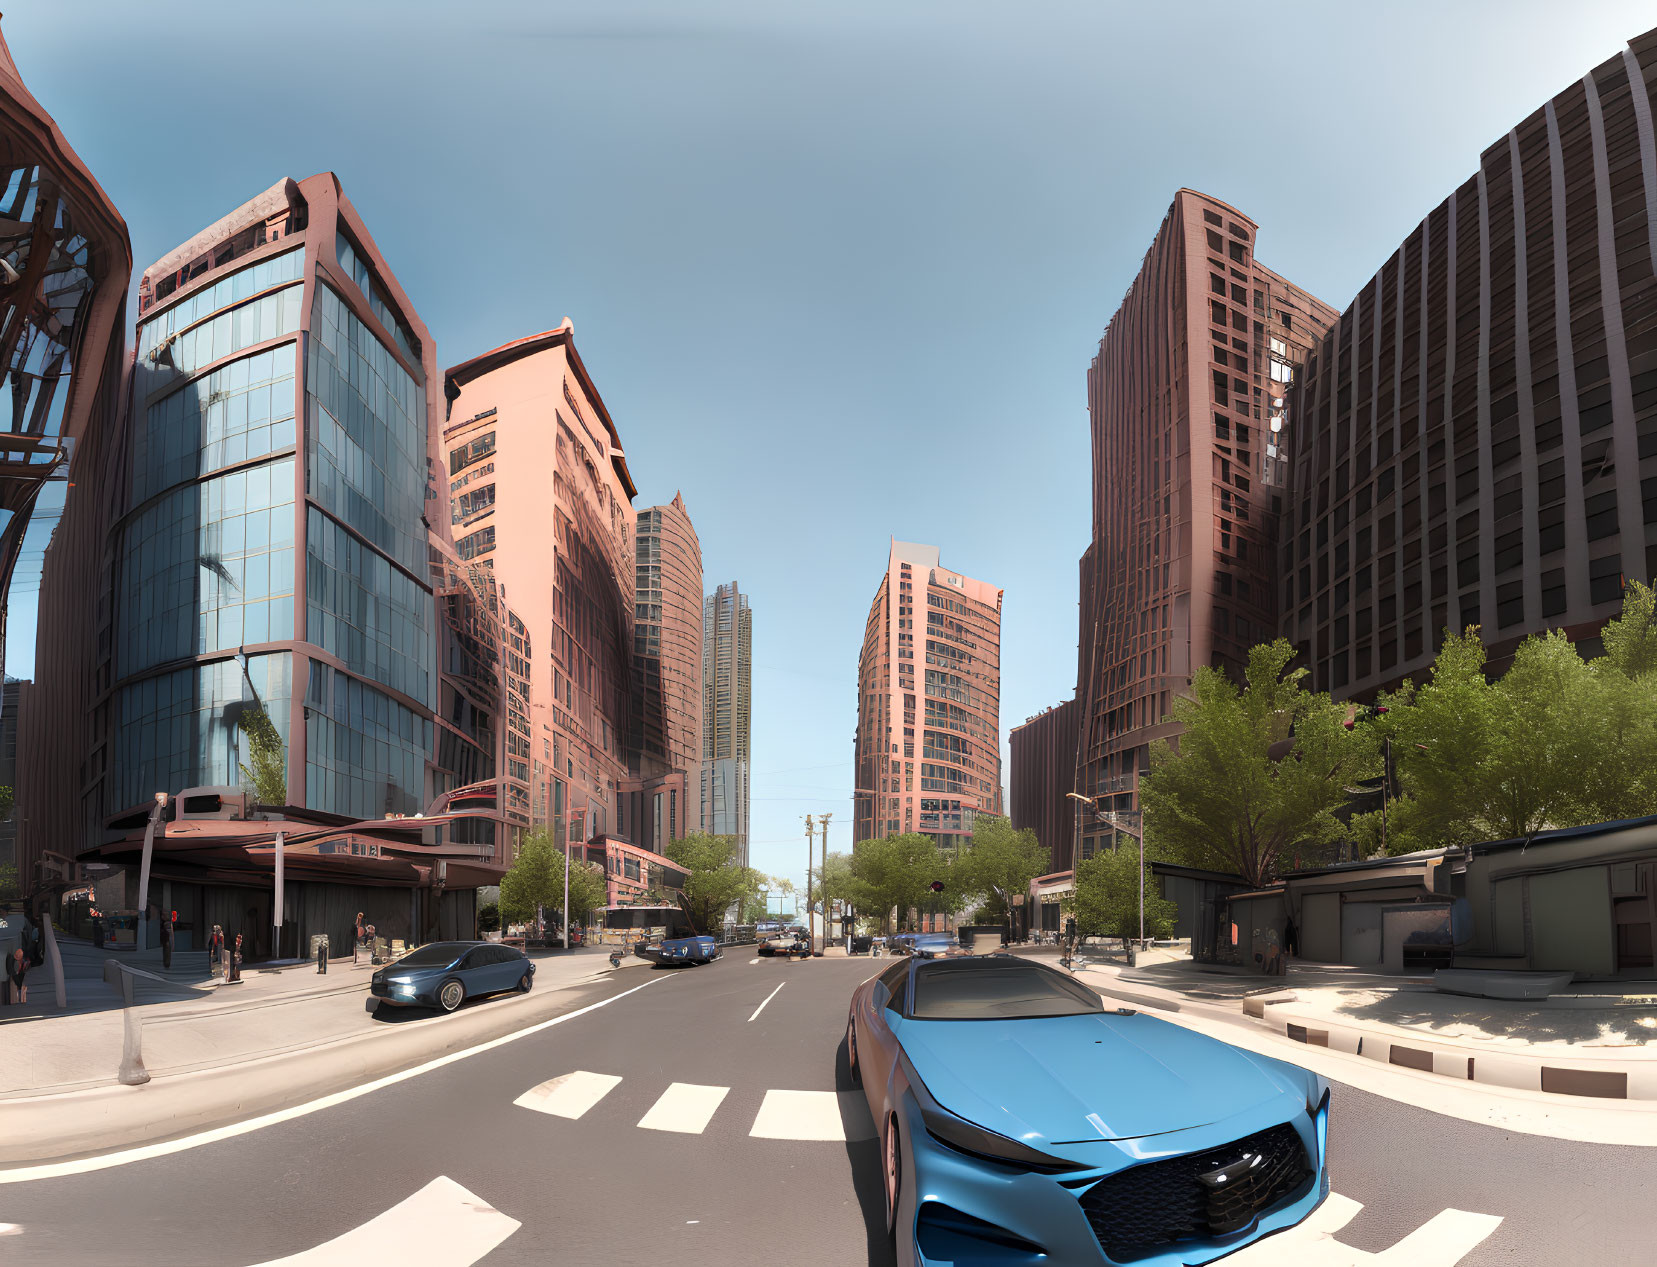 Panoramic modern city street with tall buildings and clear blue skies